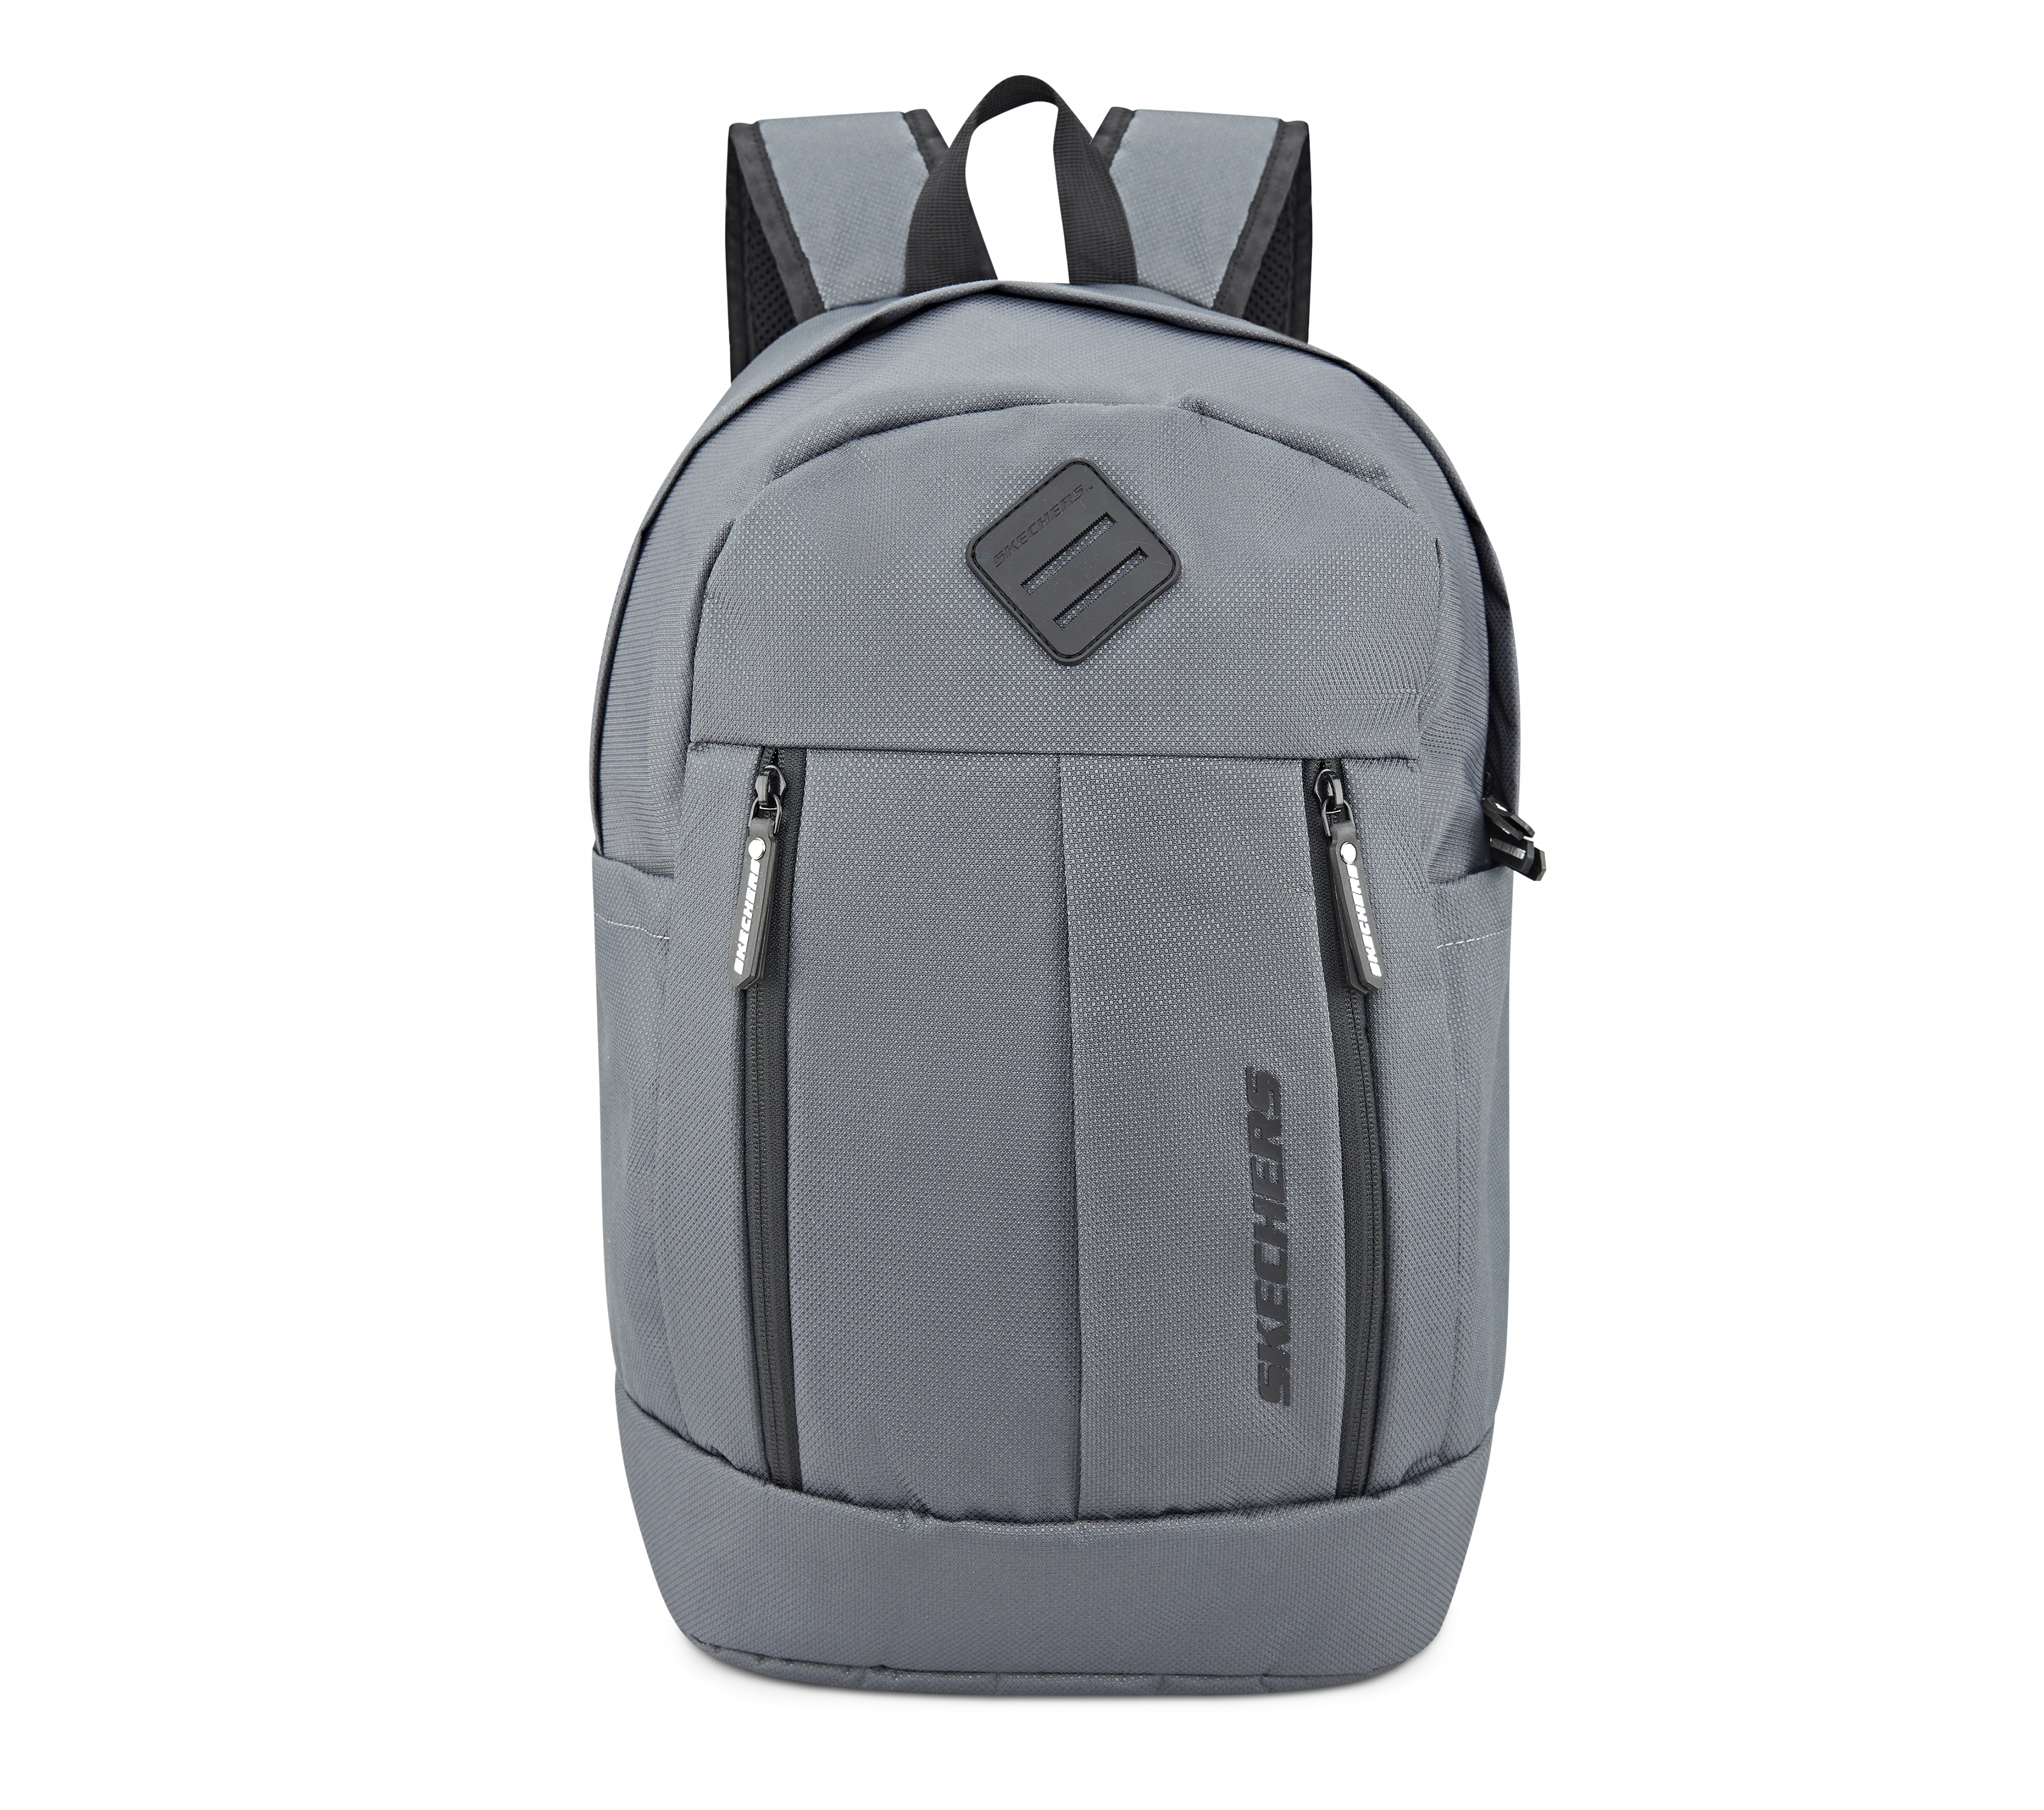 LAPTOP BAG WITH TWIN POCKETS, GREY Accessories Lateral View